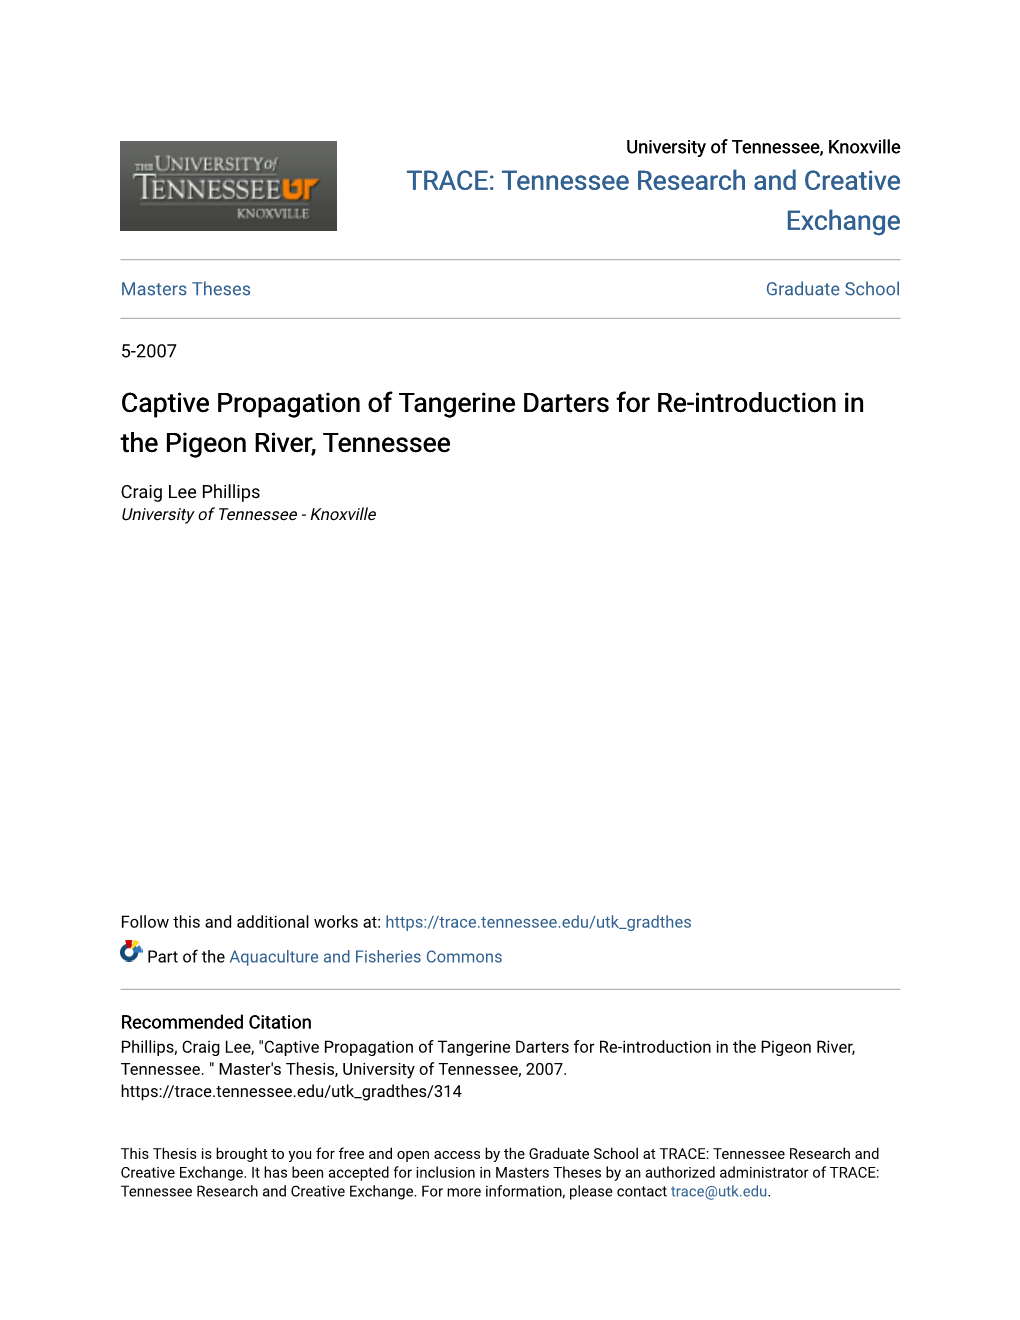 Captive Propagation of Tangerine Darters for Re-Introduction in the Pigeon River, Tennessee